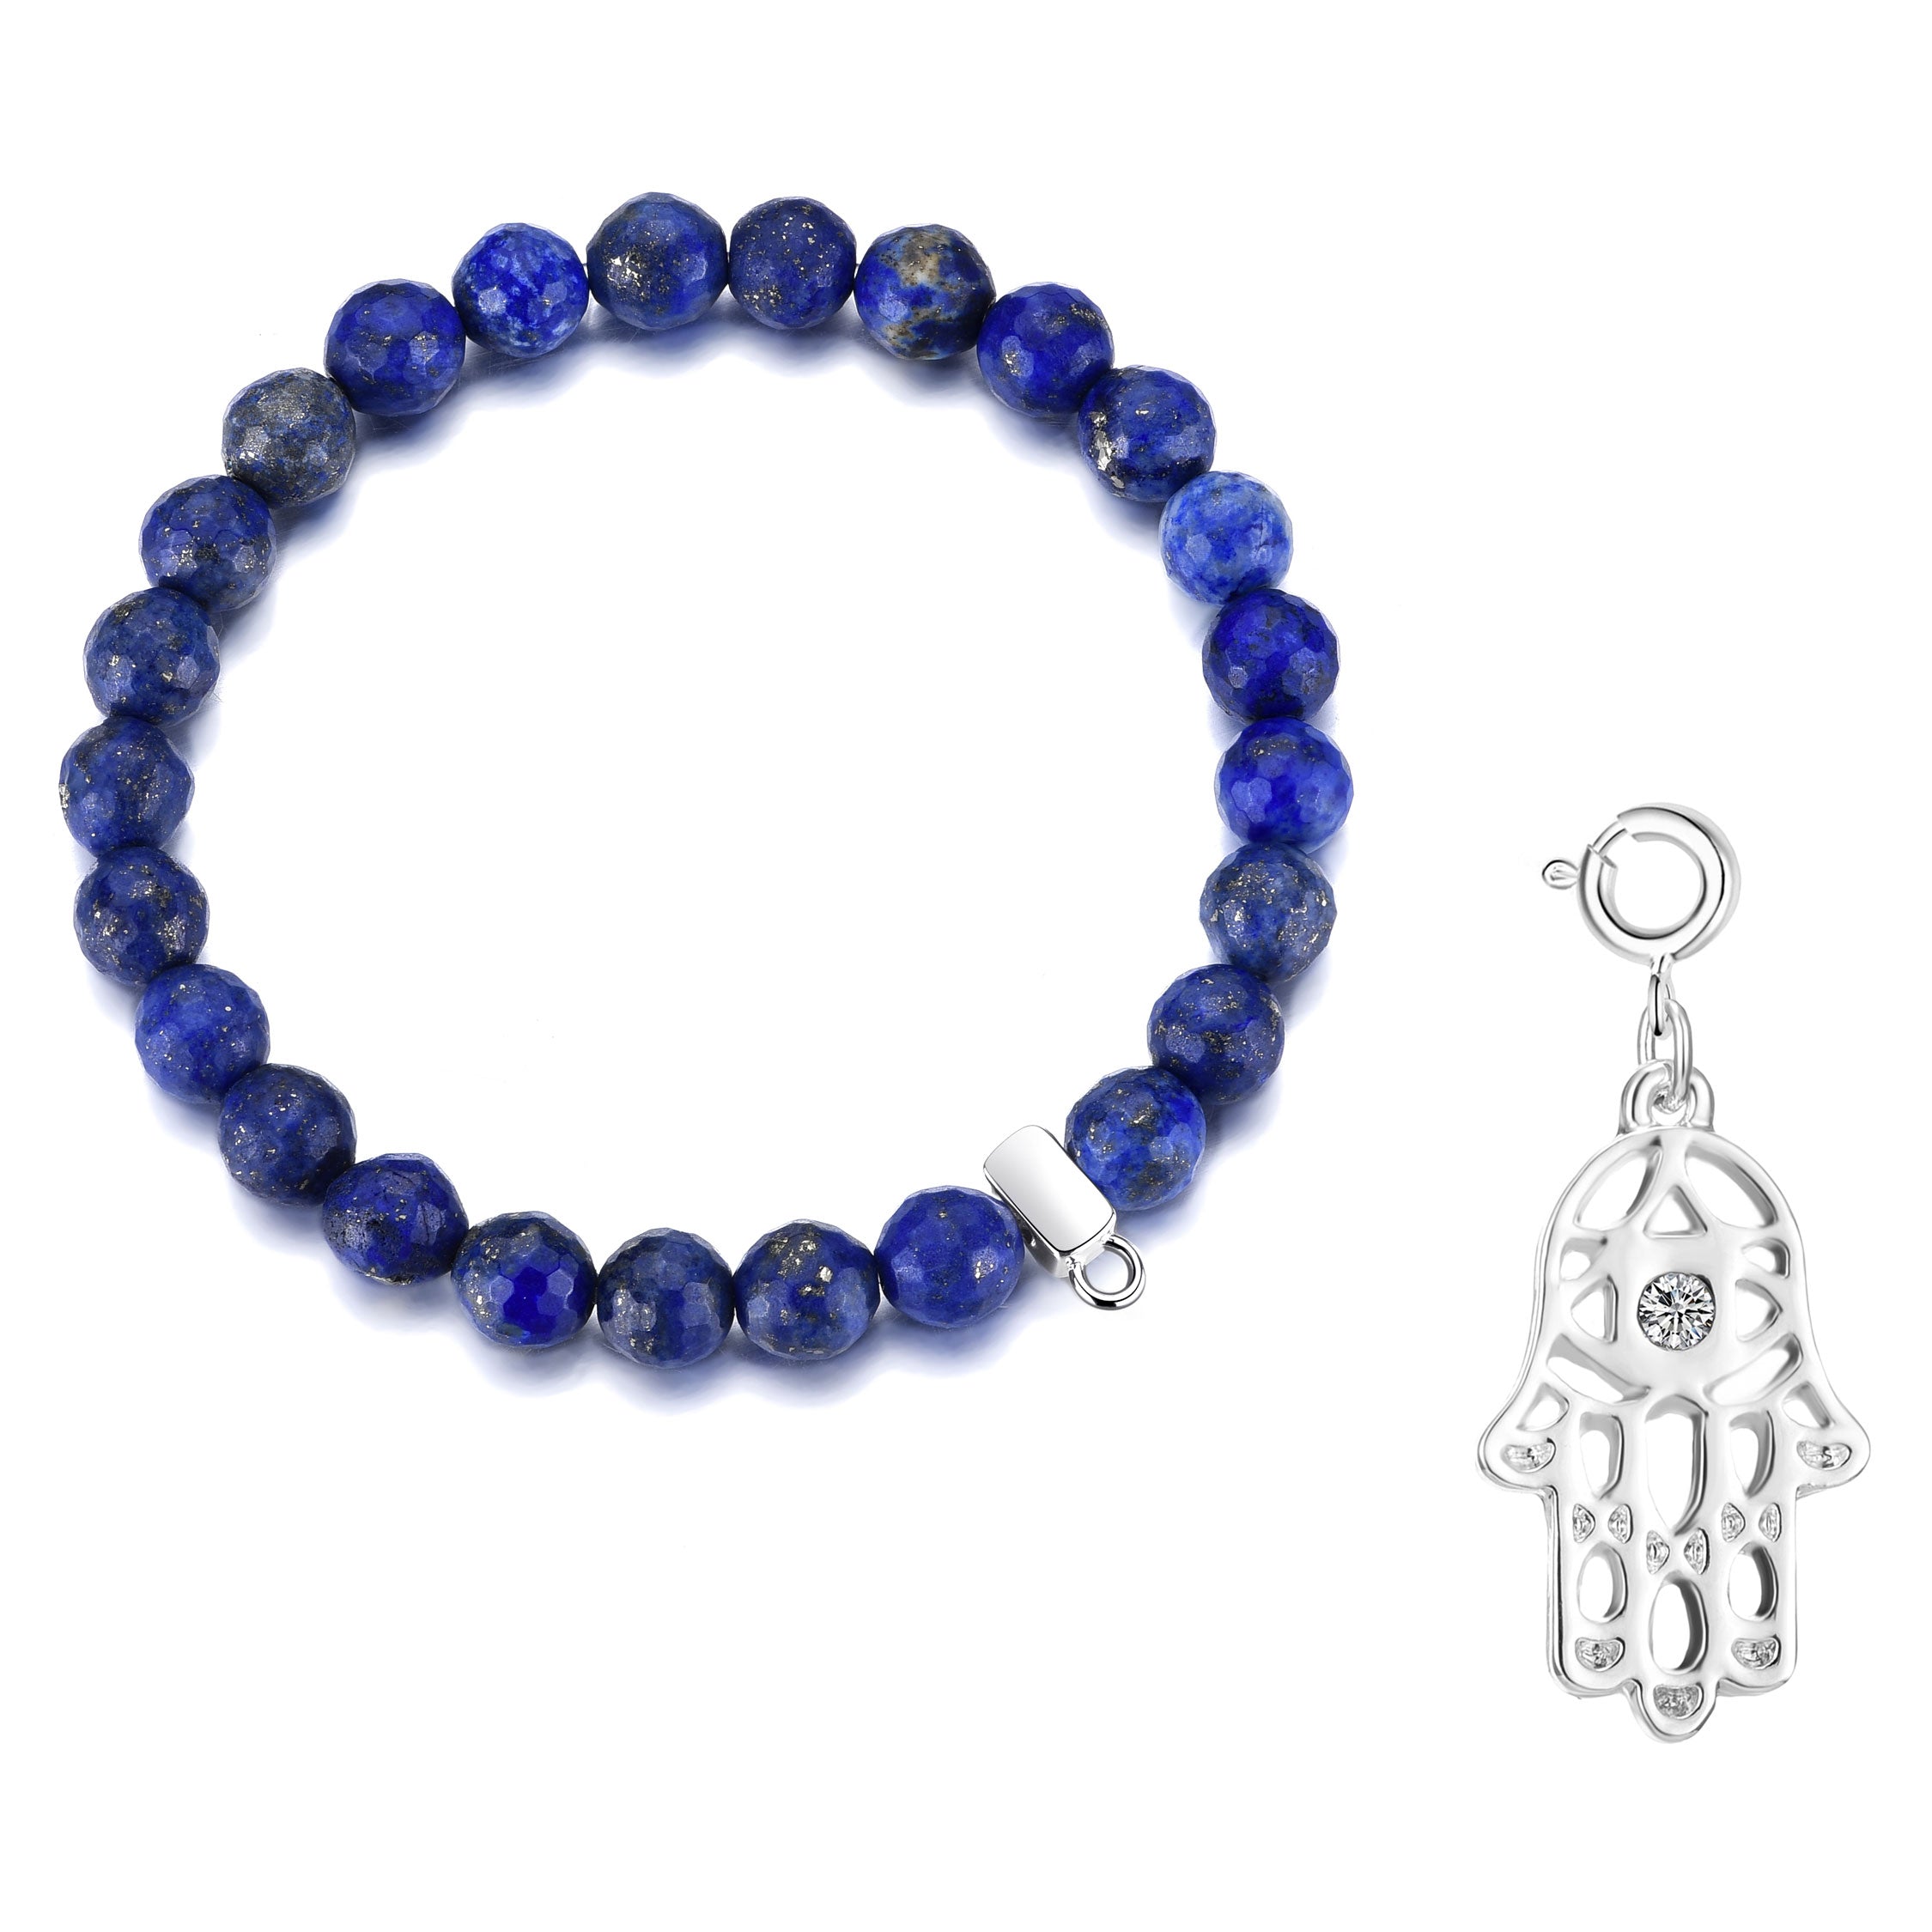 Faceted Lapis Gemstone Bracelet with Charm Created with Zircondia® Crystals